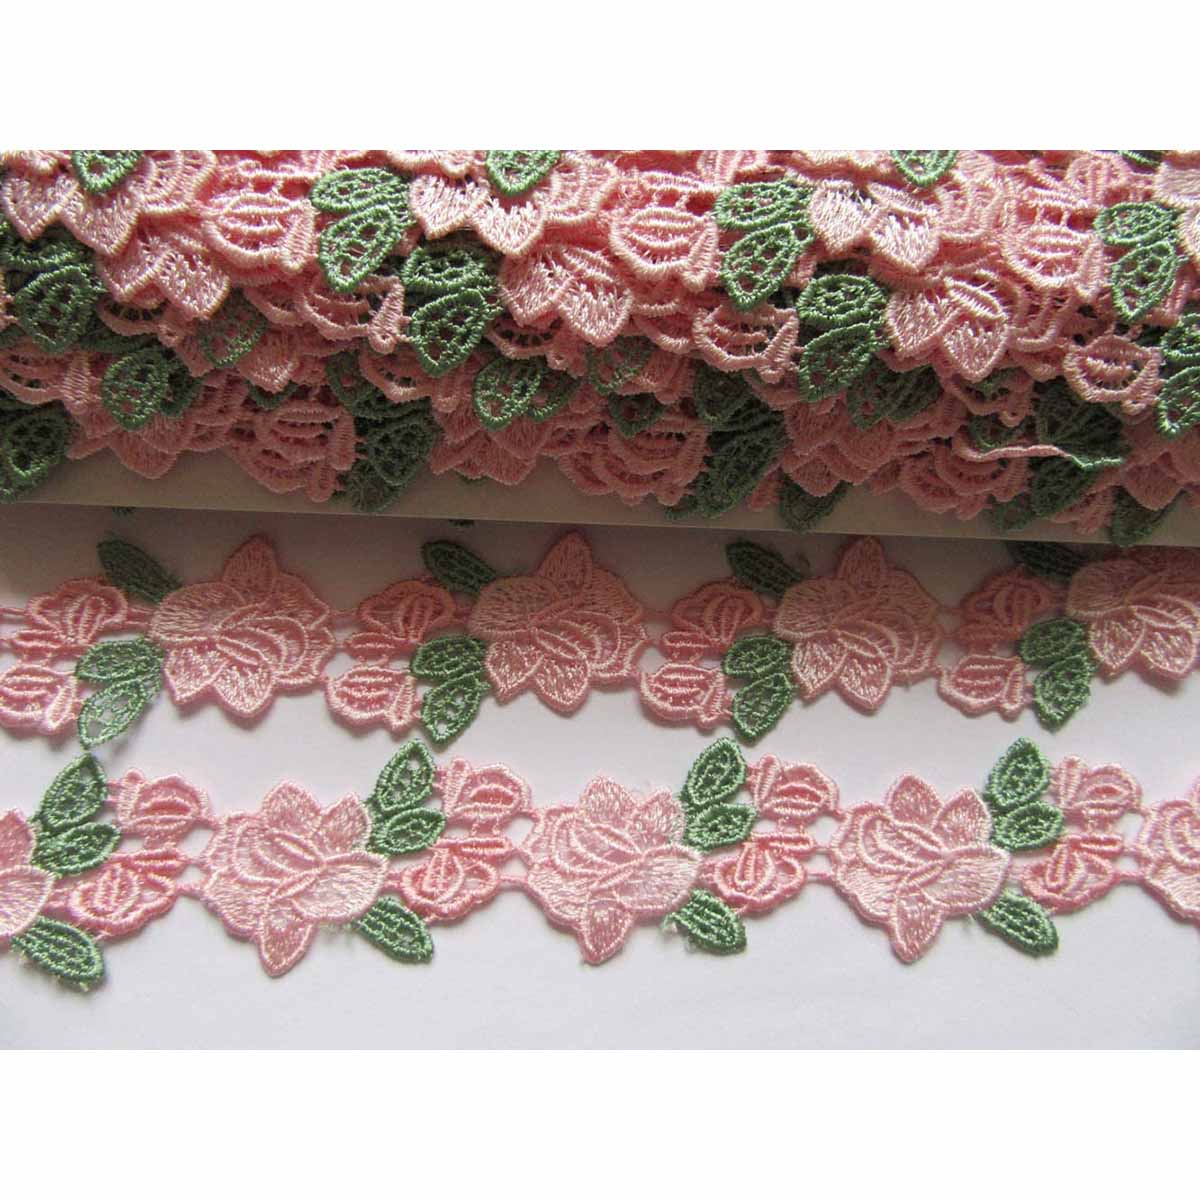 5 Yards YYCRAFT Butterfly 3 Lace Edge Trim Wedding Applique DIY Sewing-Baby Pink 